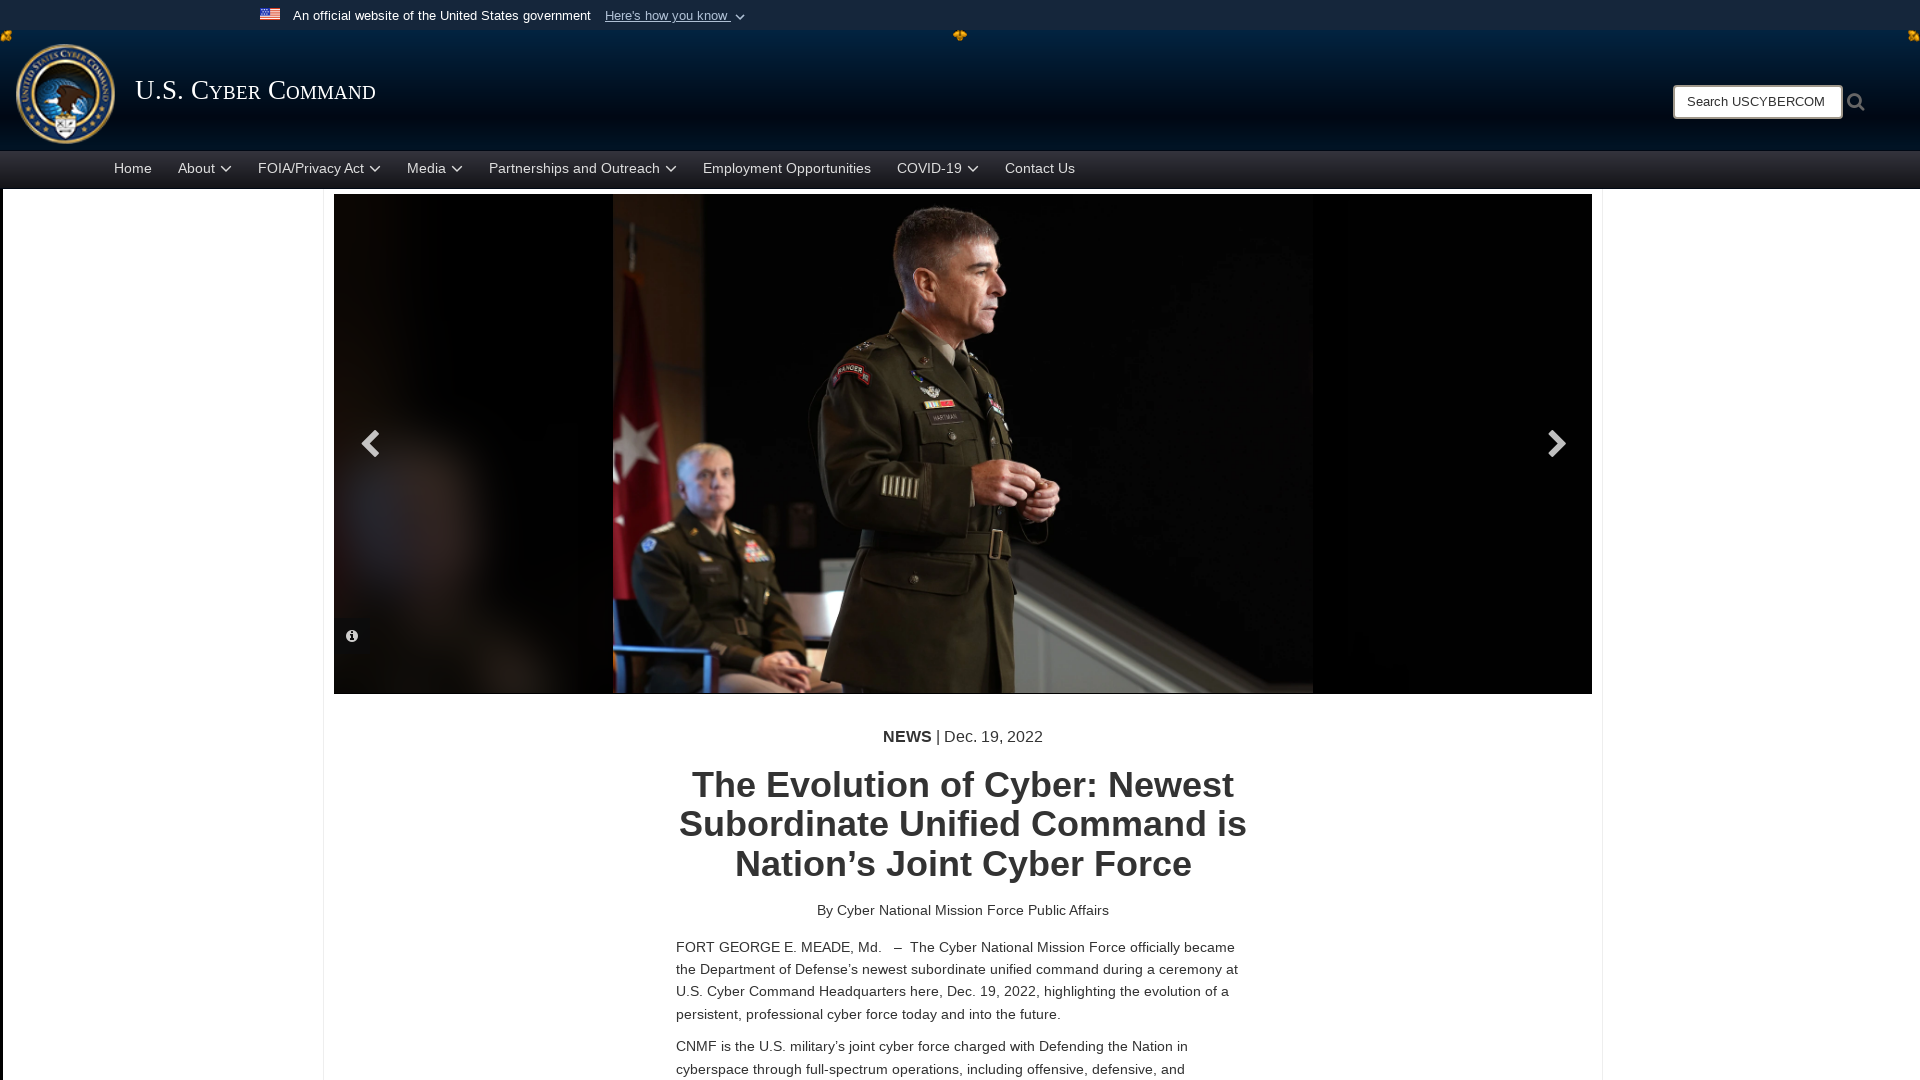 The Evolution of Cyber: Newest Subordinate Unified Command is Nation’s Joint Cyber Force > U.S. Cyber Command > News